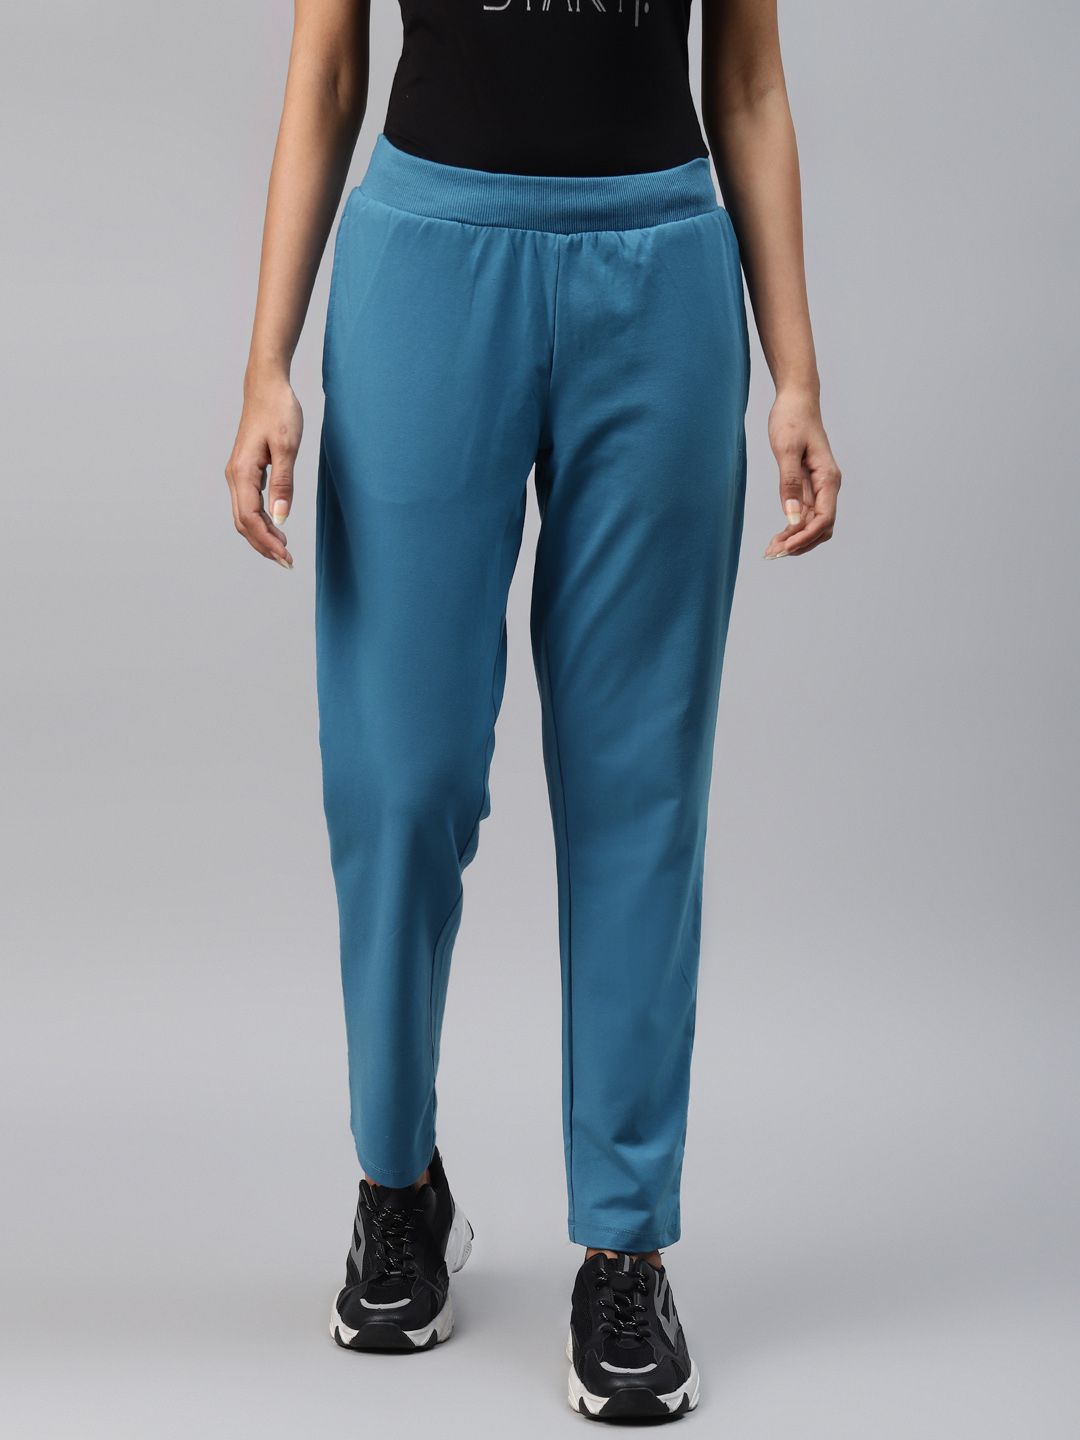 Alcis Women Teal Blue Straight Fit Solid Track Pants Price in India